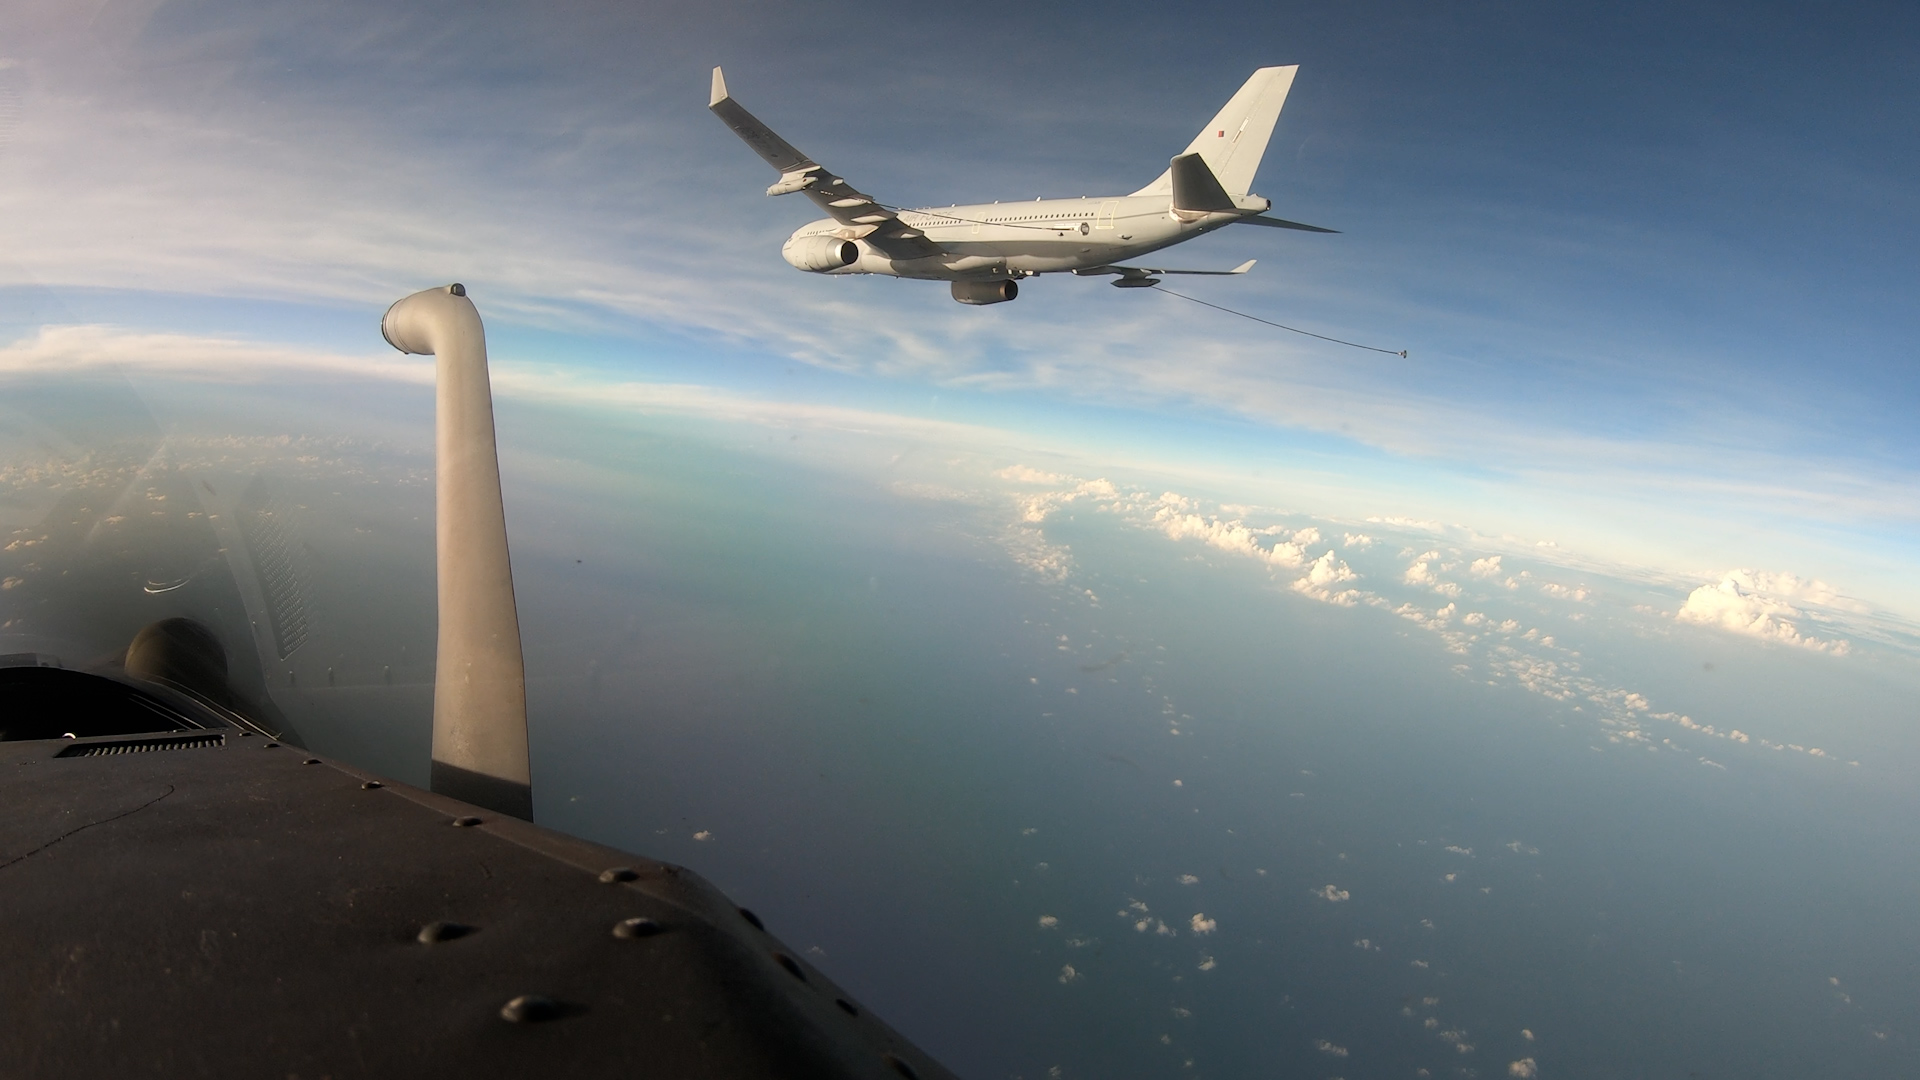 Image shows RAF Voyager in flight over clouds.